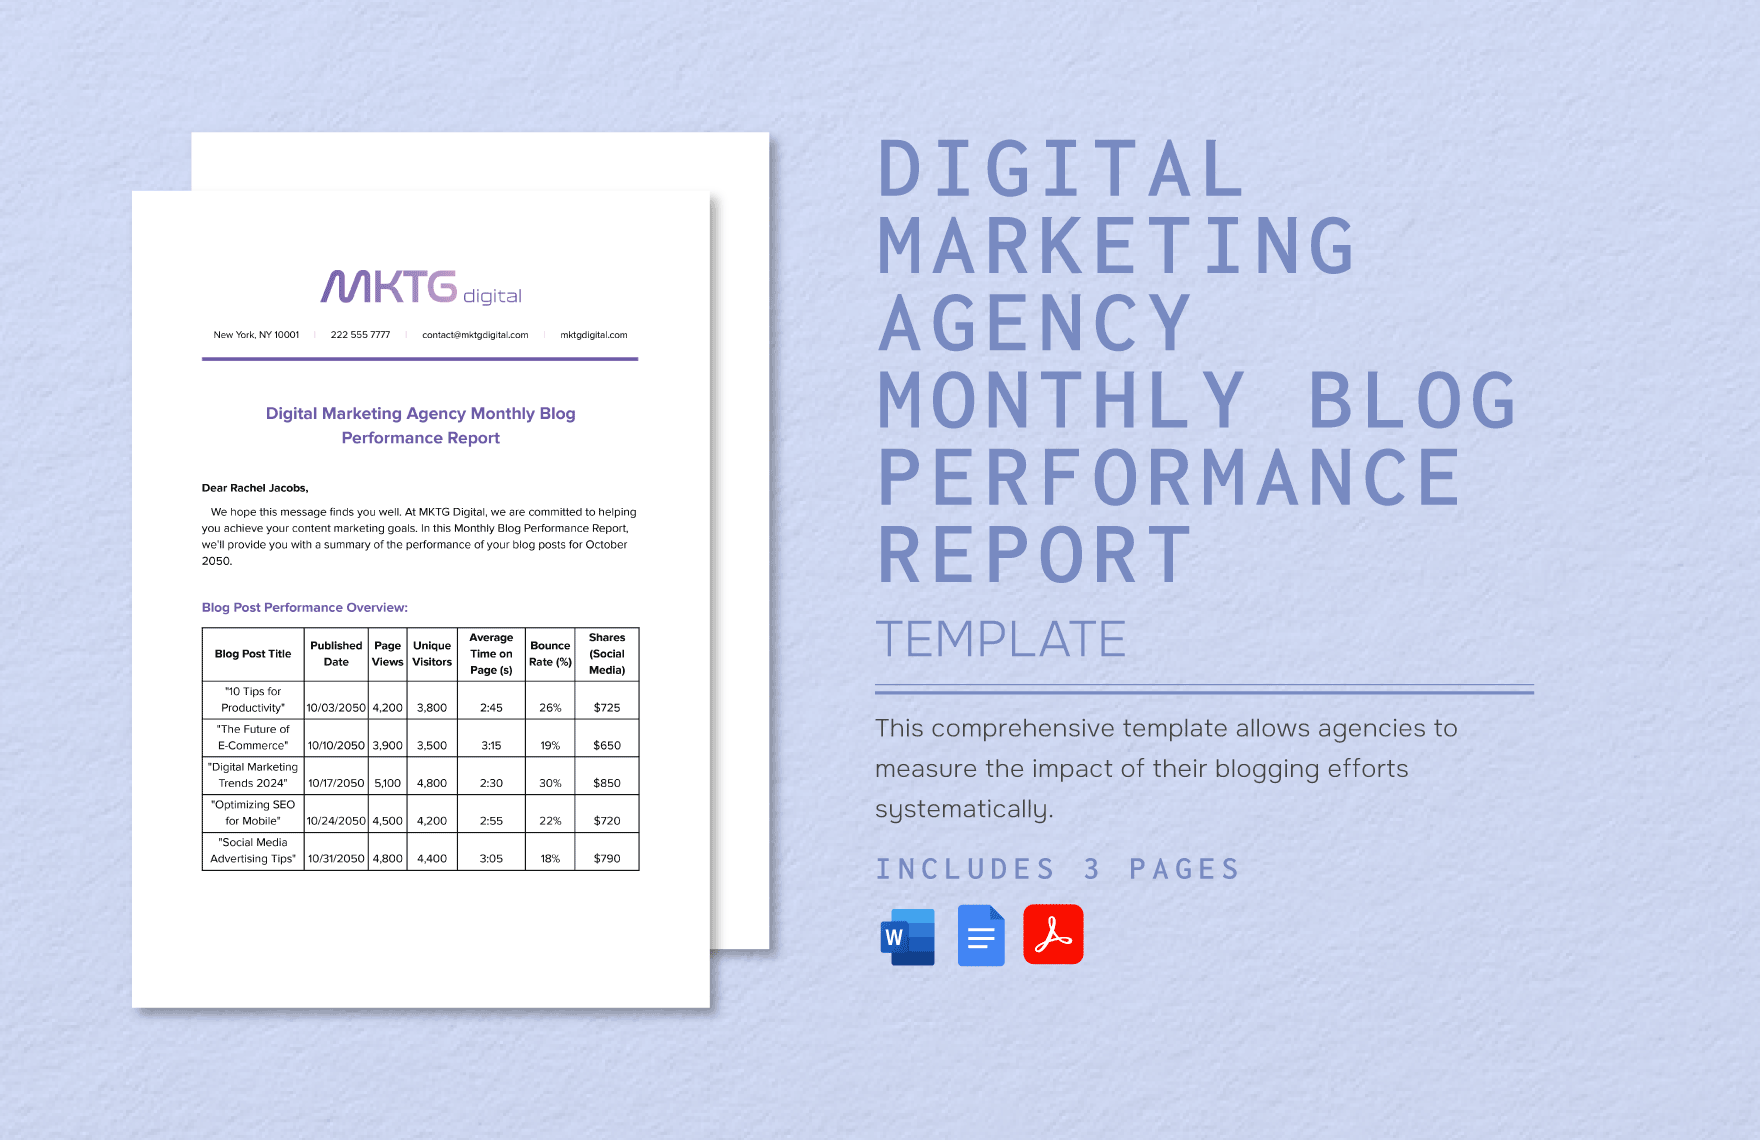 Digital Marketing Agency Monthly Blog Performance Report Template